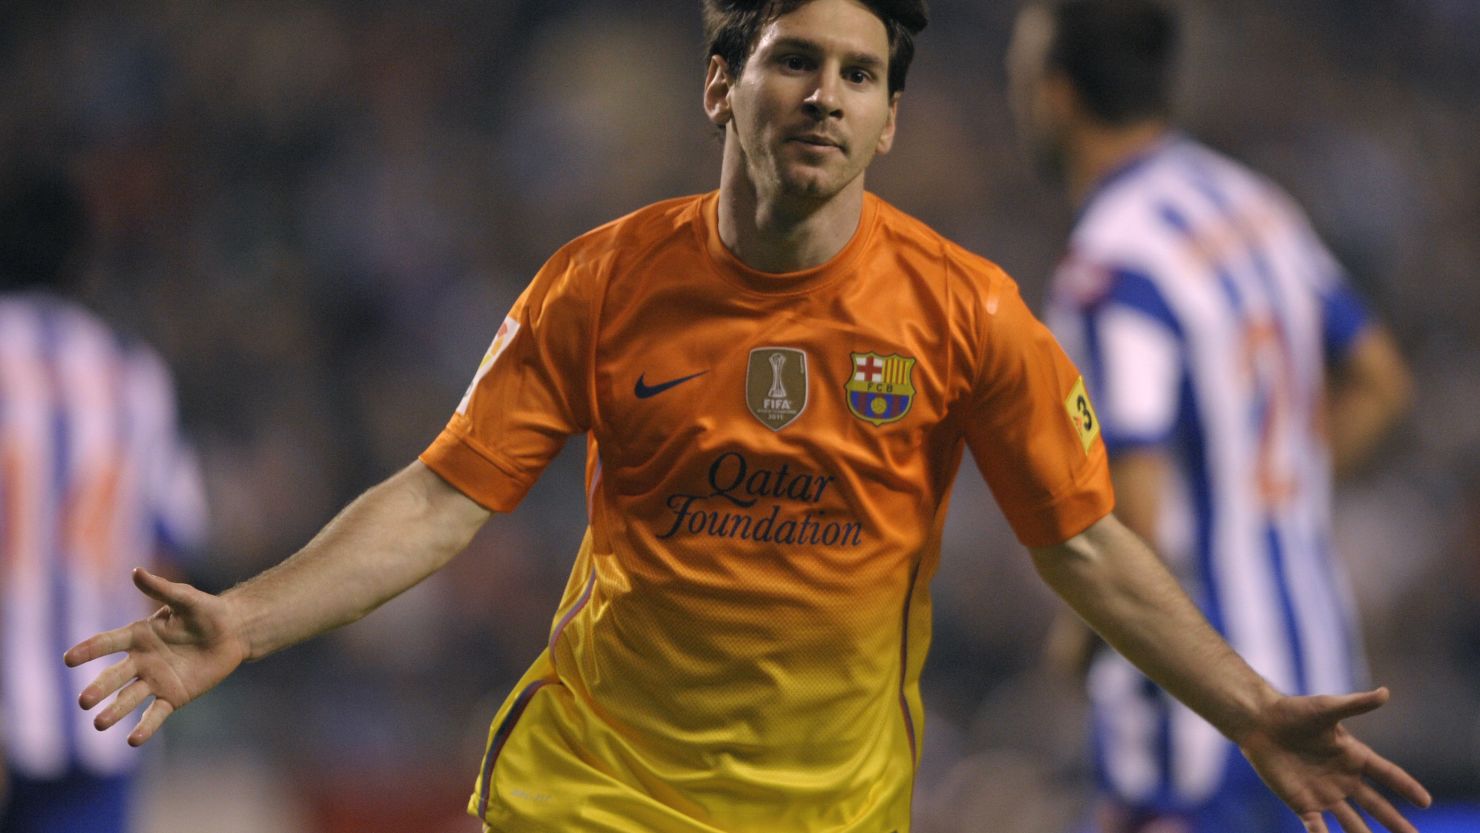 Lionel Messi inspired Barcelona to a 5-4 victory over Deportivo La Coruna on Saturday scoring yet another hat-trick.